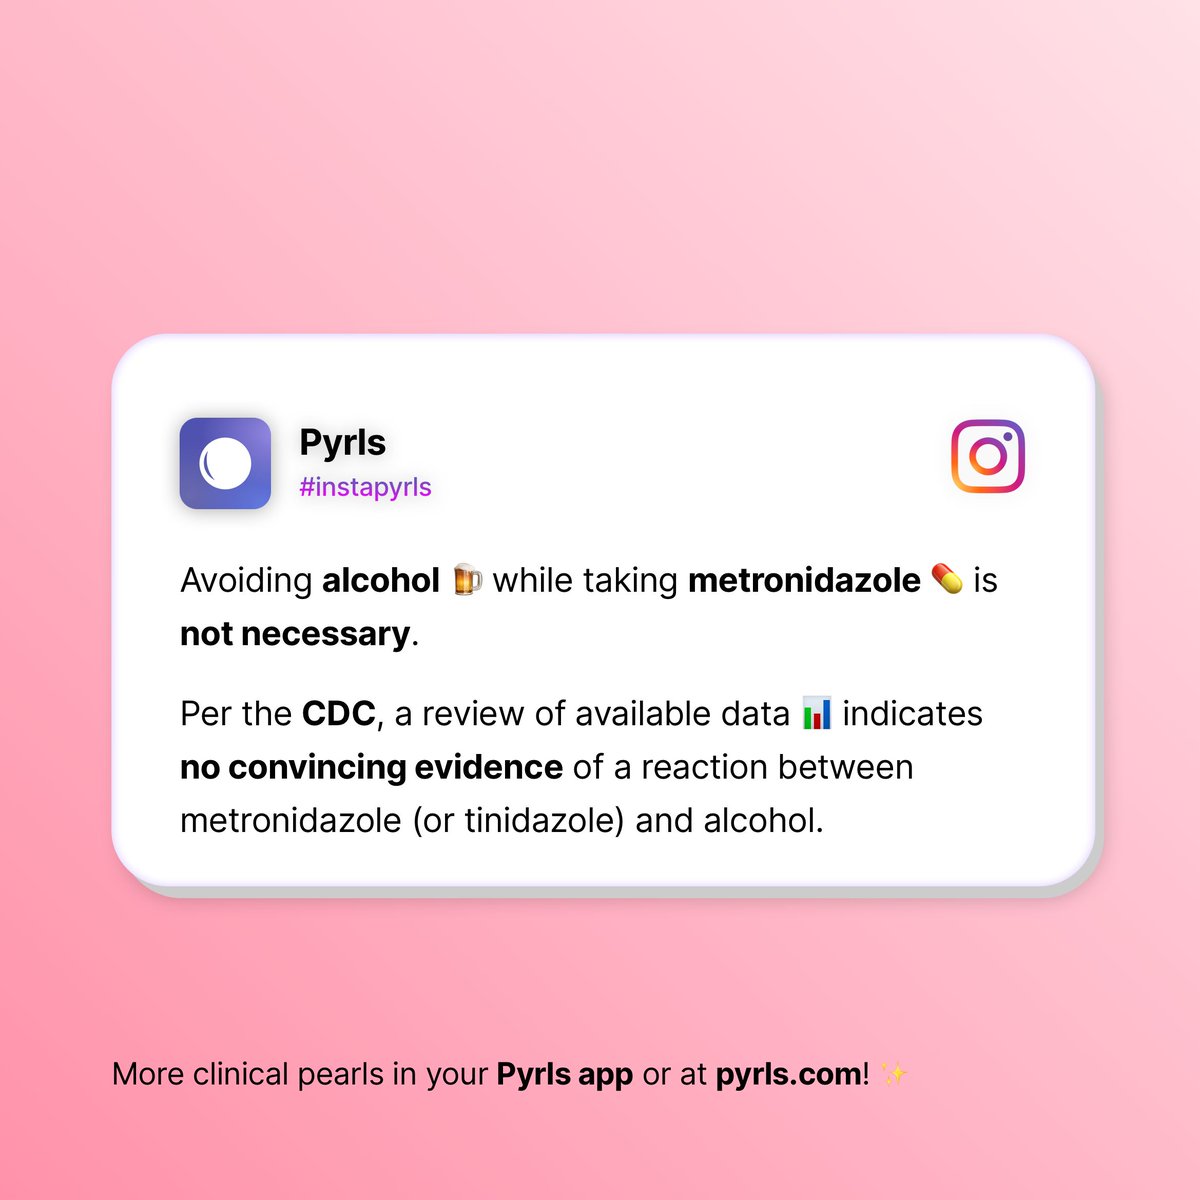 Avoiding alcohol 🍺 while taking metronidazole 💊 is not necessary. Per the CDC, a review of available data 📊 indicates no convincing evidence of a reaction between metronidazole (or tinidazole) and alcohol.